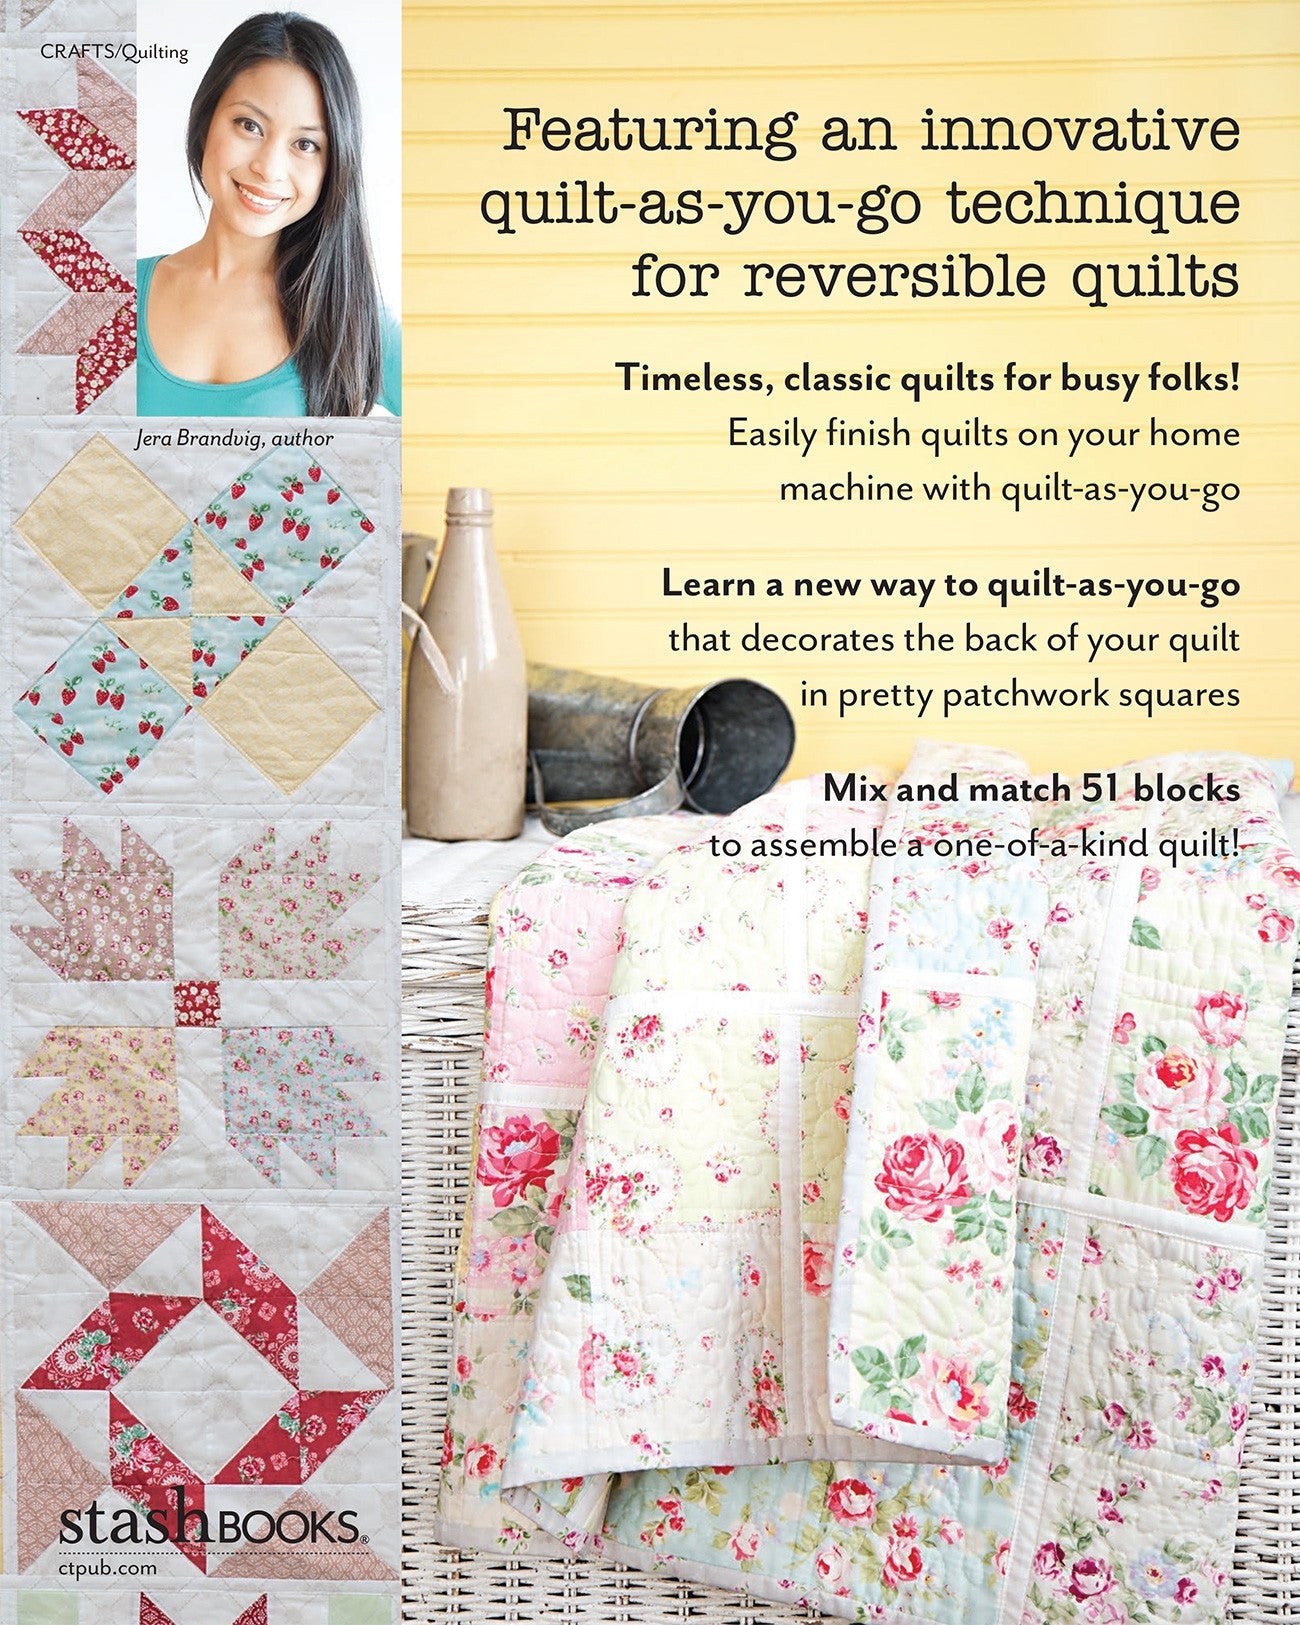 Quilt As-You-Go Made Clever {signed}